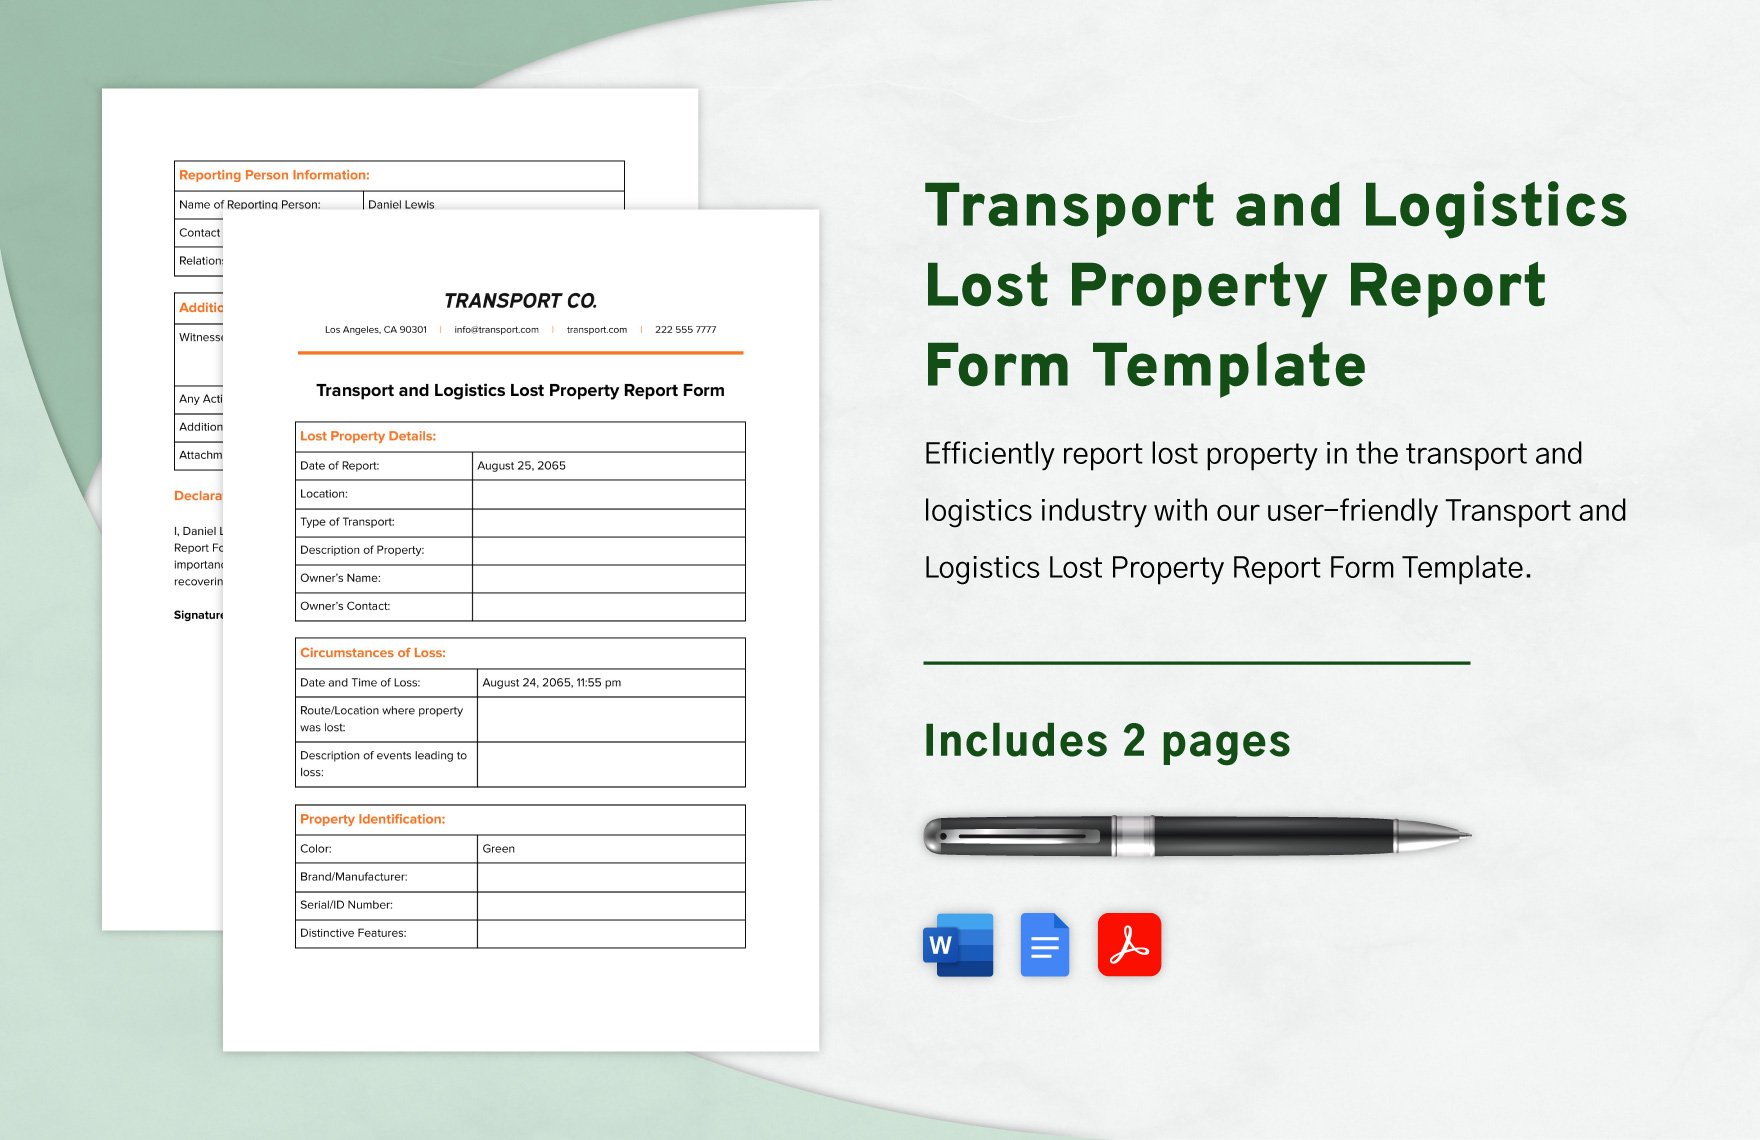 Transport and Logistics Lost Property Report Form Template